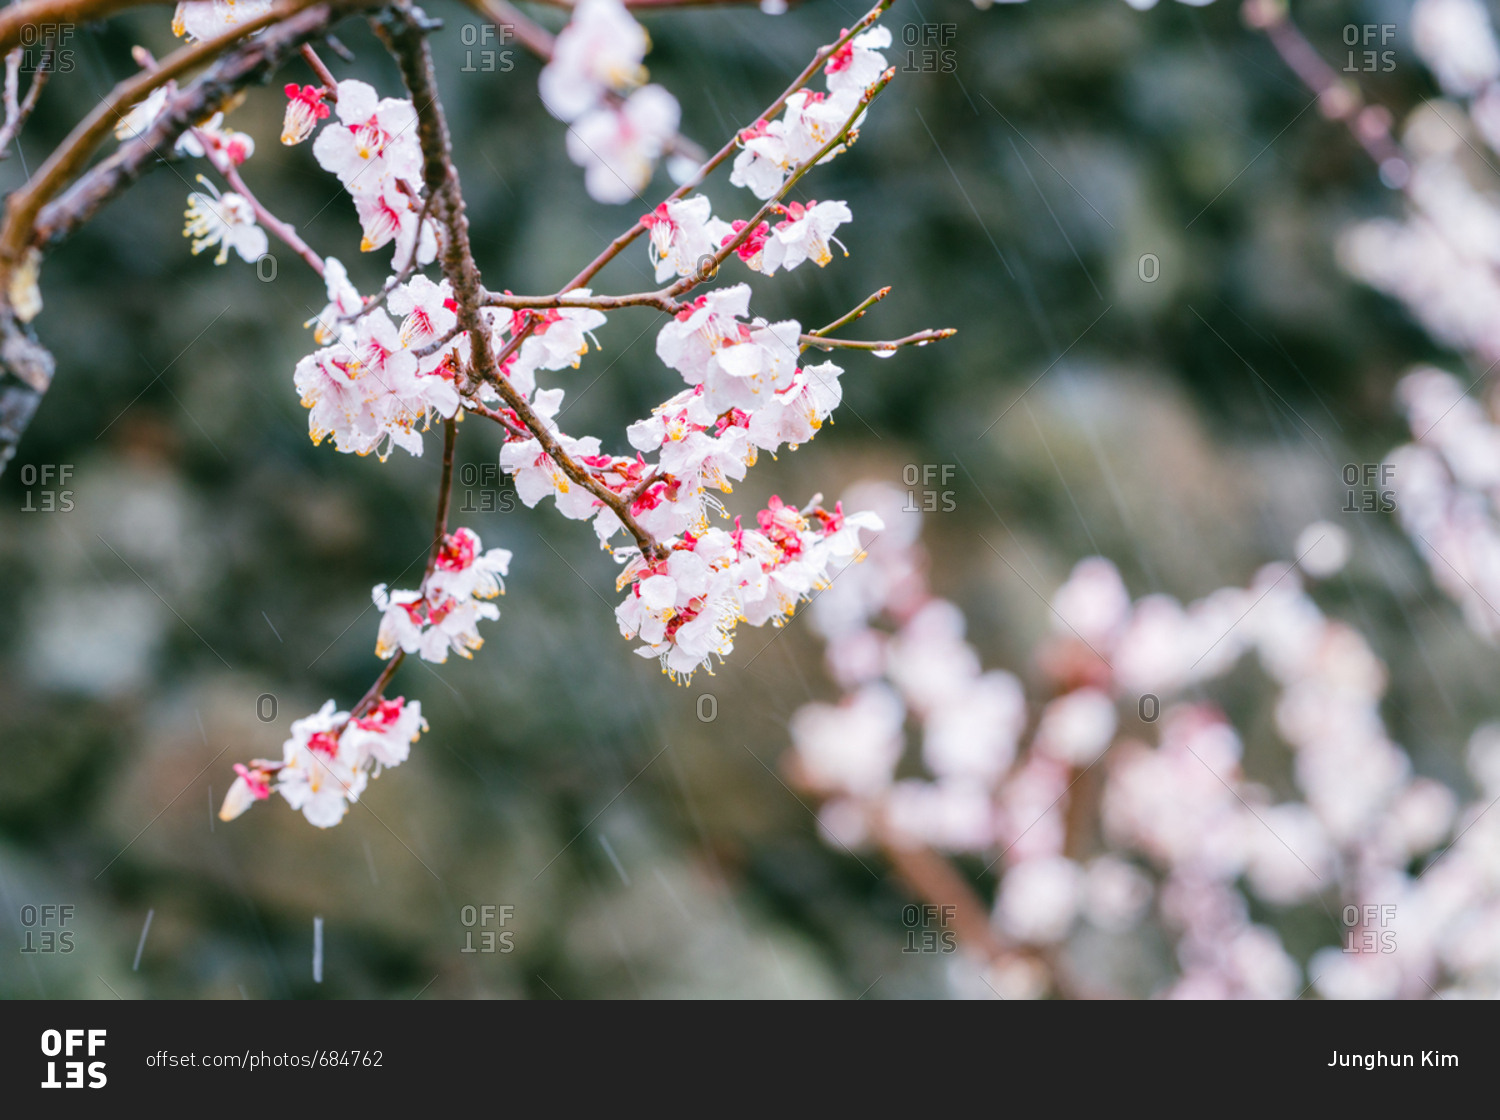 Branch with plum blossoms in rain